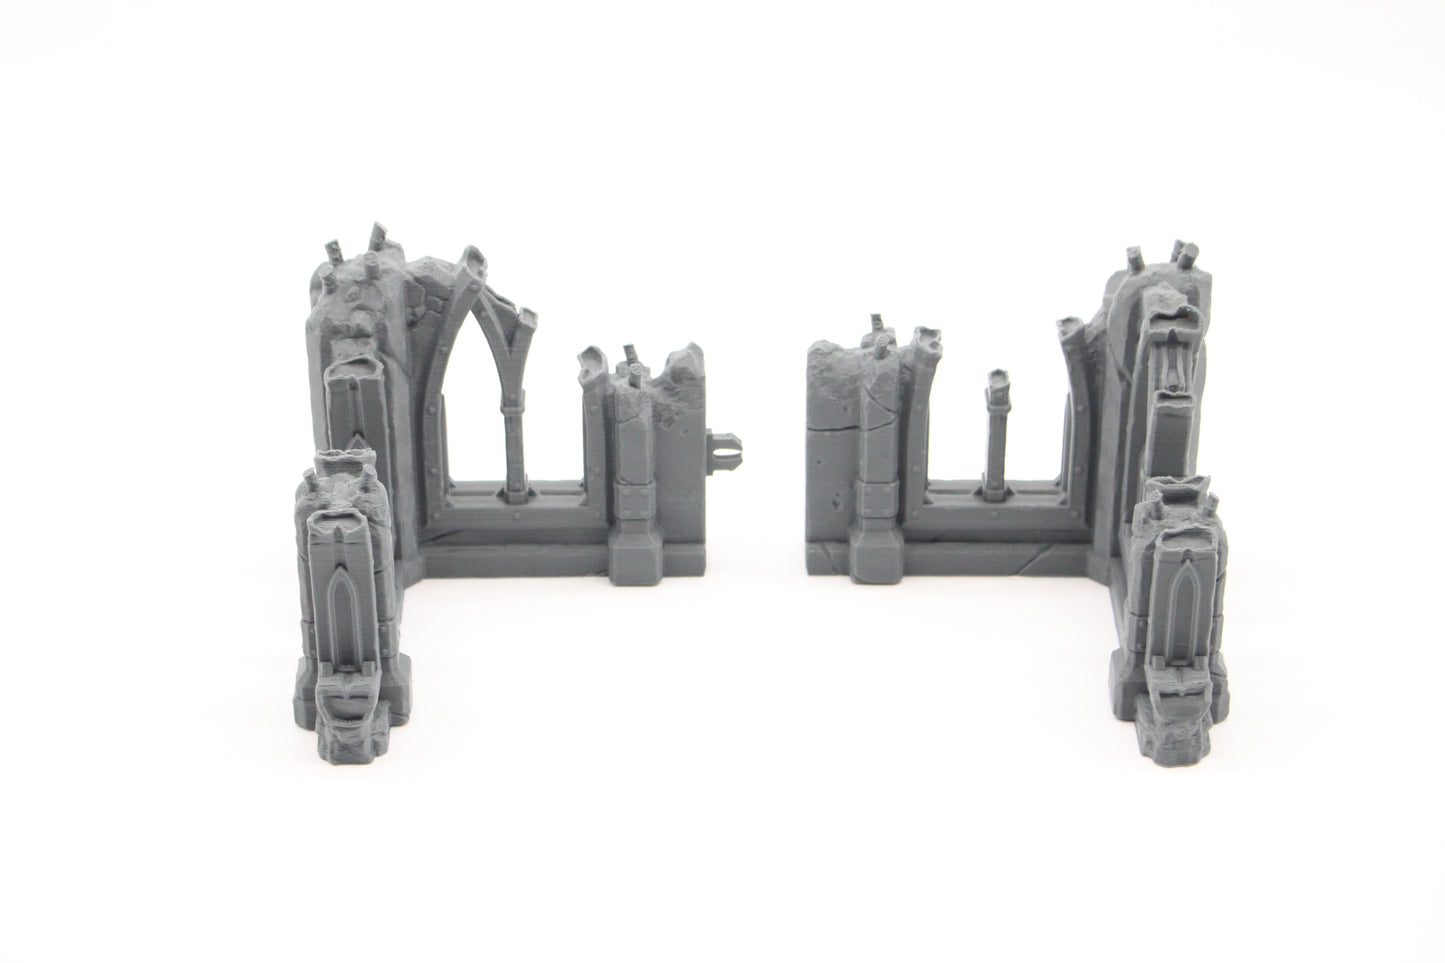 Bundle 1 of 3D Printed V2 Gothic Ruined Structures